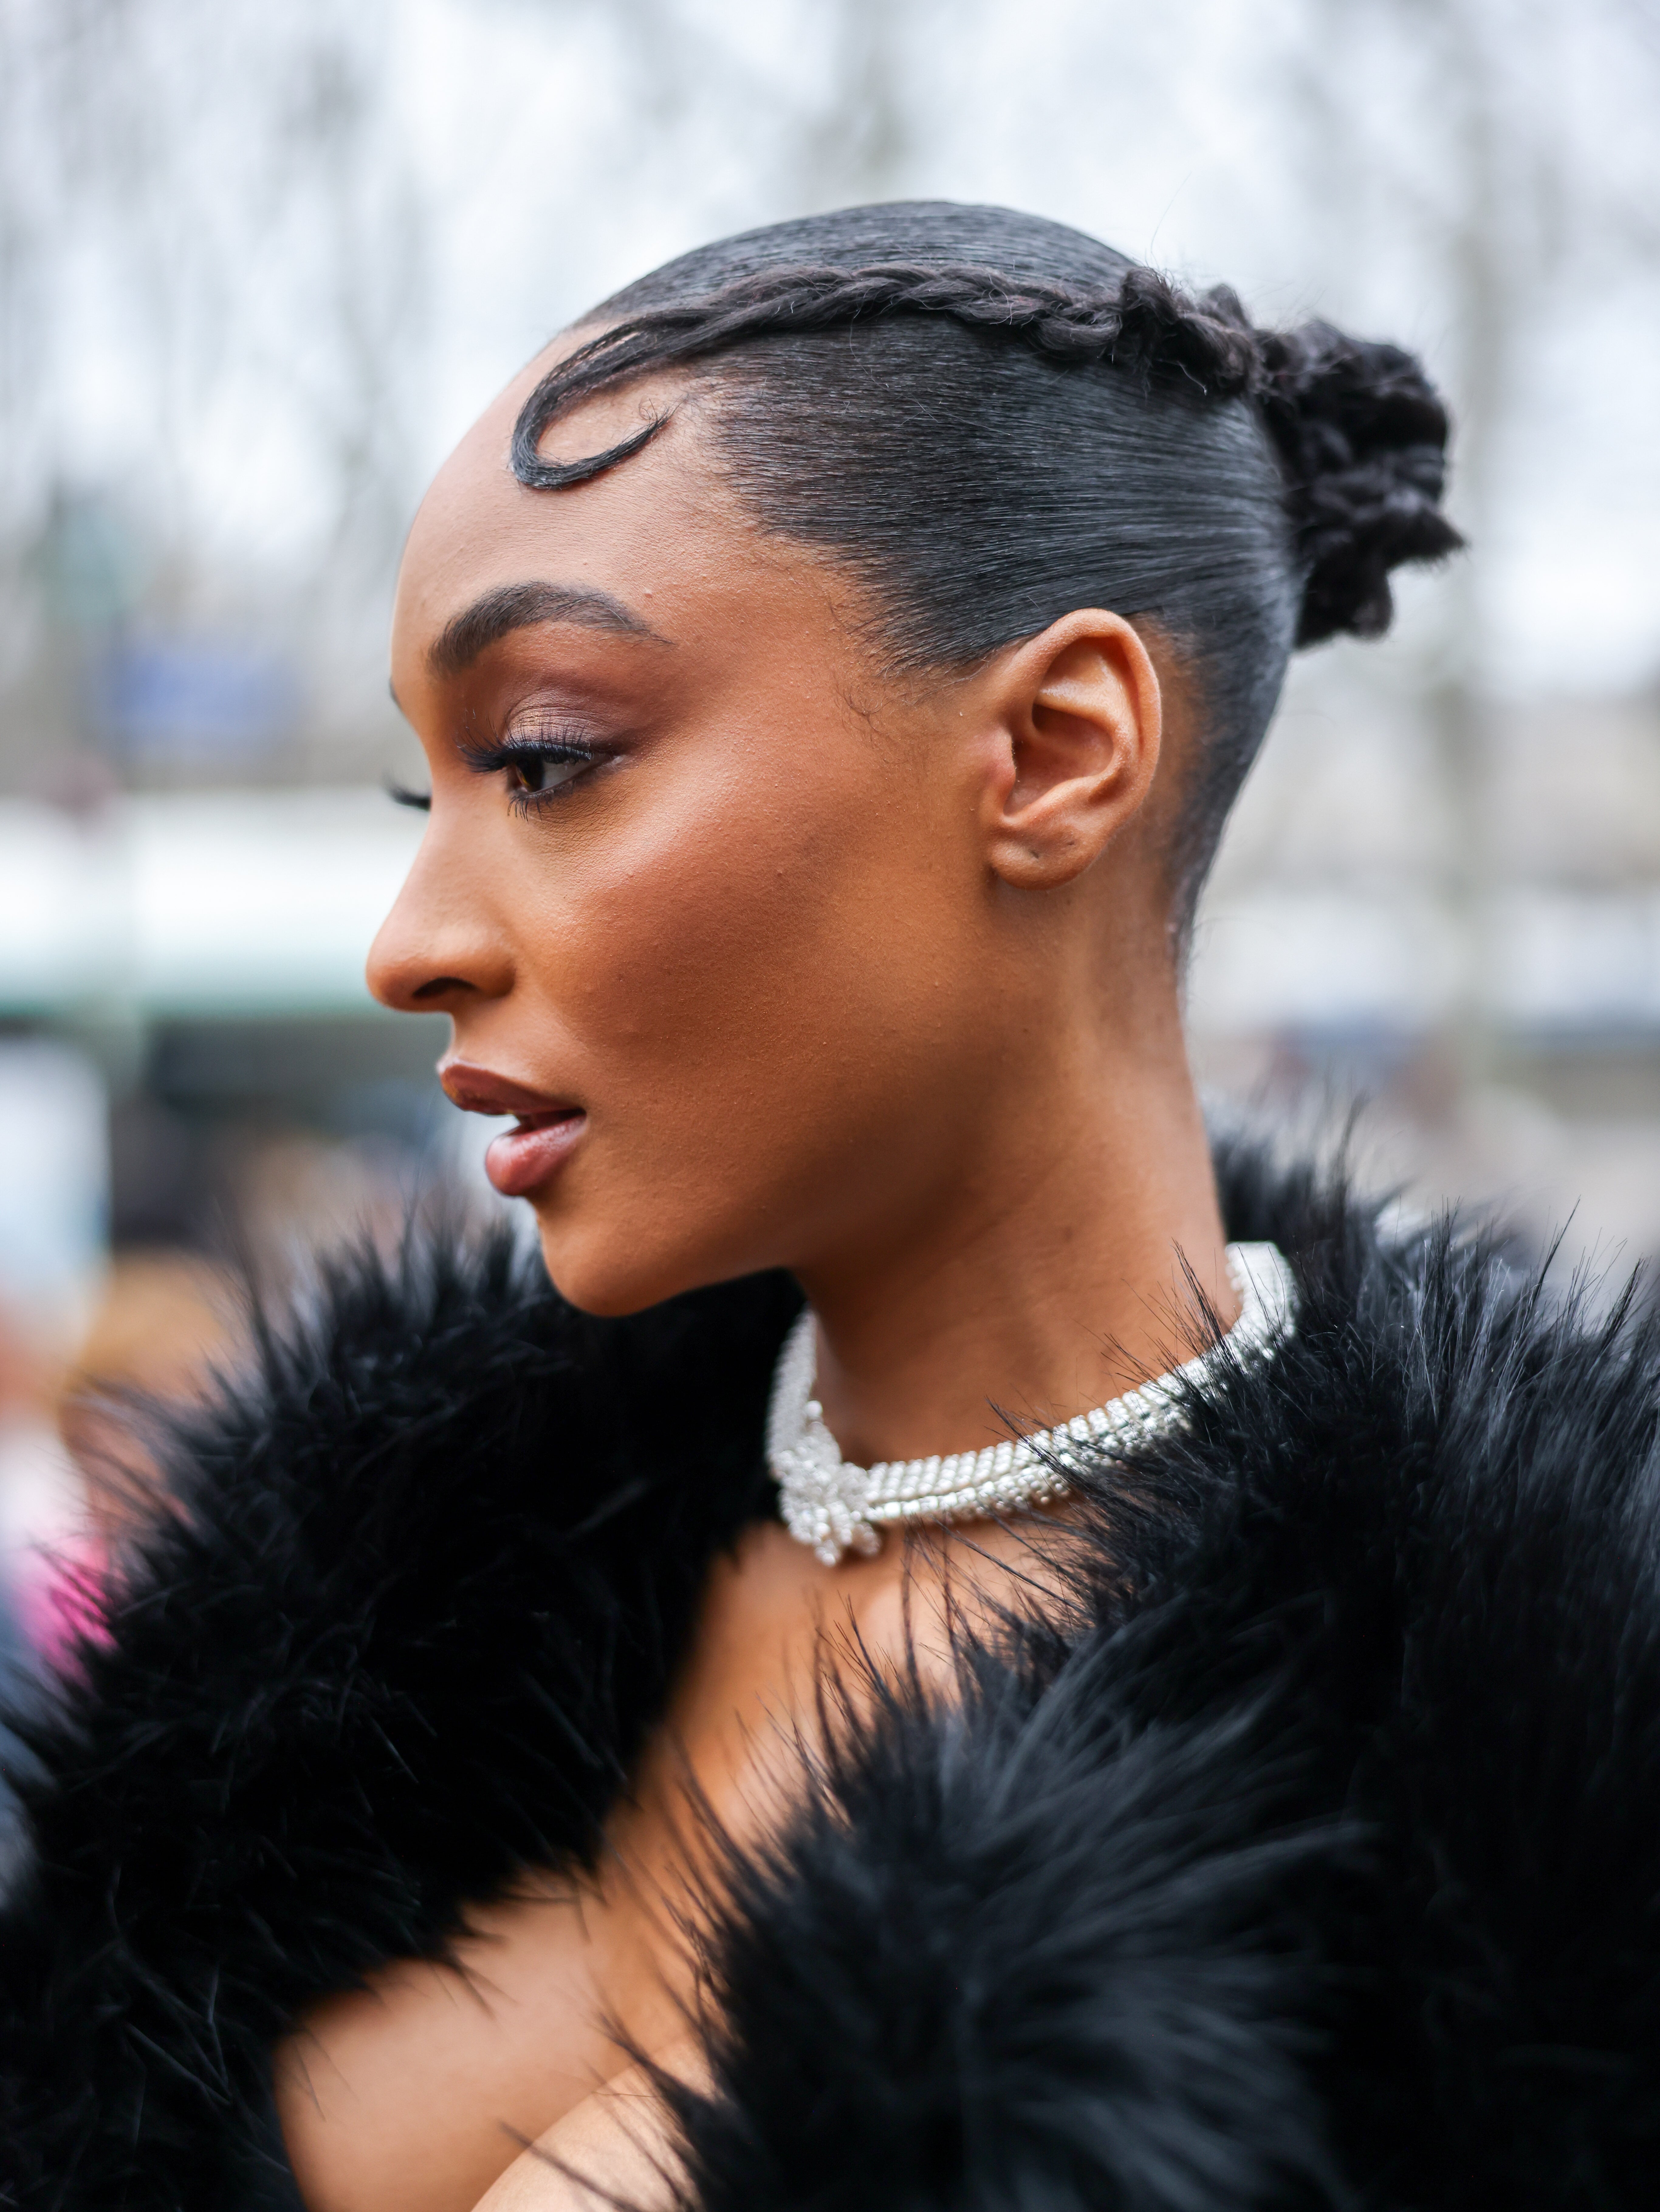 How to Achieve a Slicked-Back Bun on Natural Hair, According to